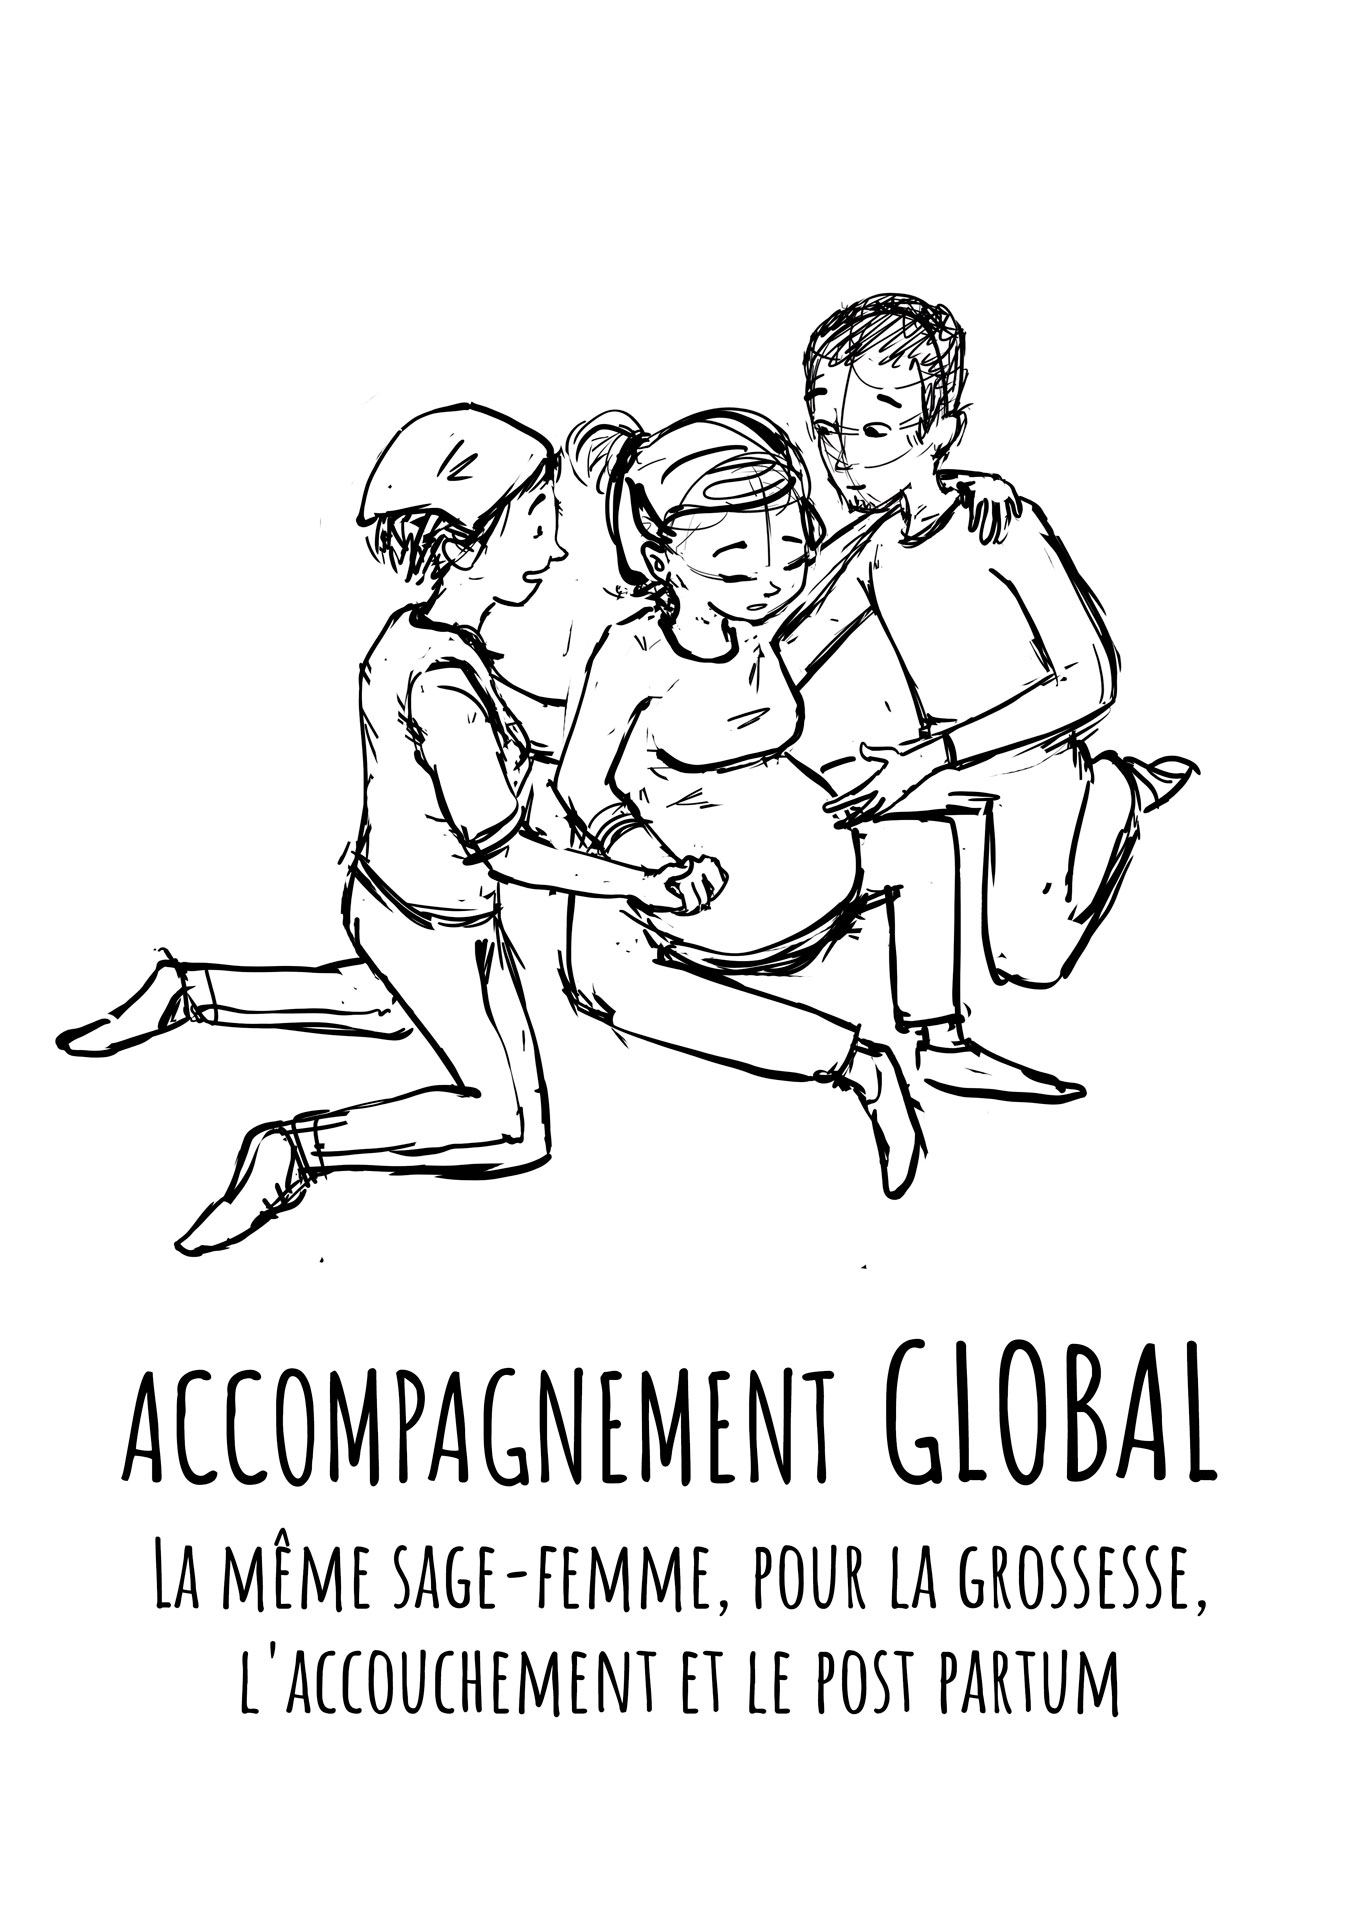 Accompagnement Global